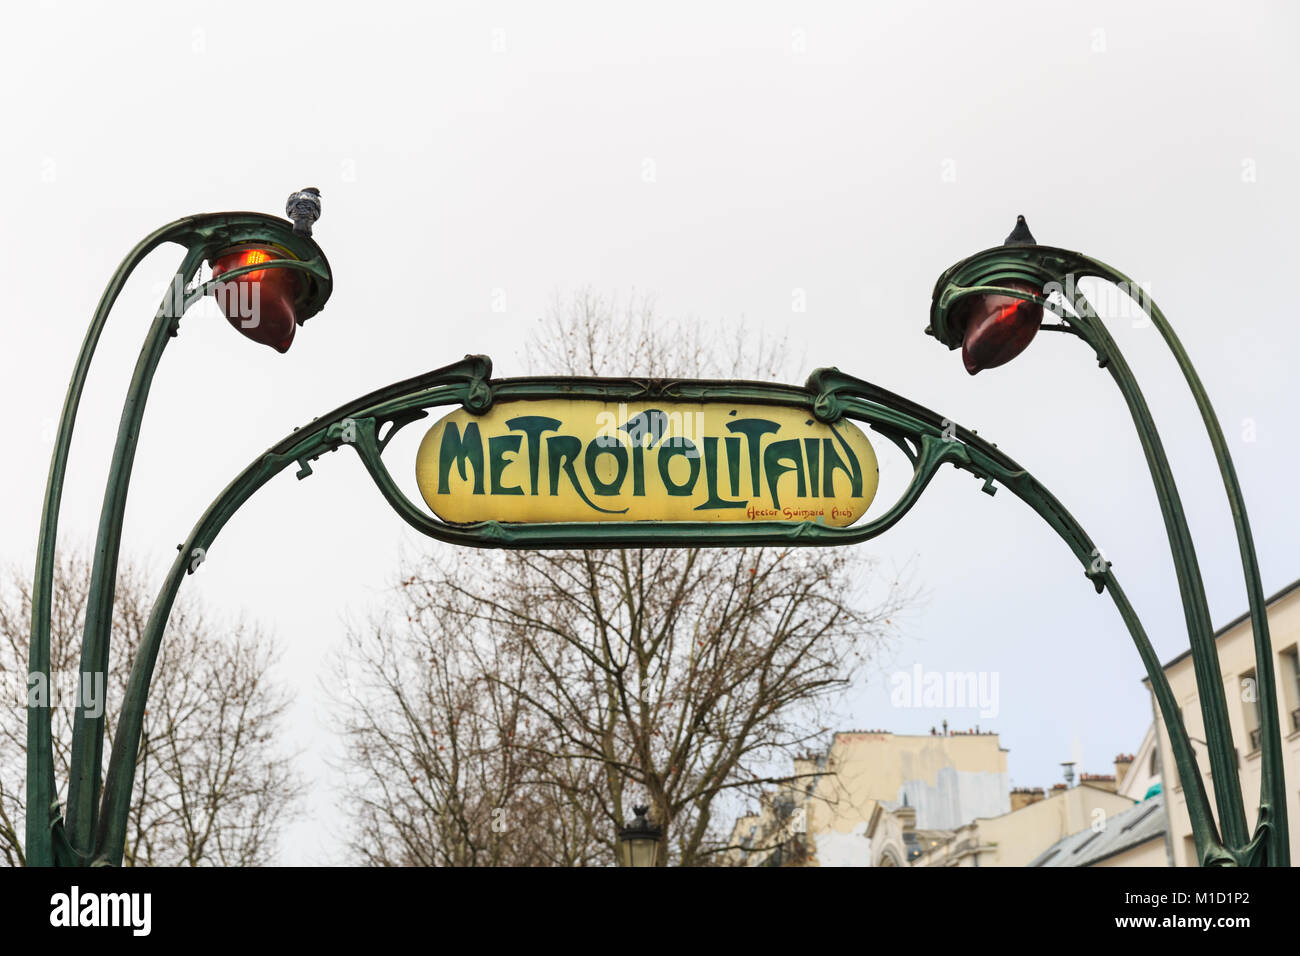 Paris Métro or Métropolitain sign and entrance at Anvers station, held between two ornate lampposts, in French Art Nouveau architecture, Paris, France Stock Photo